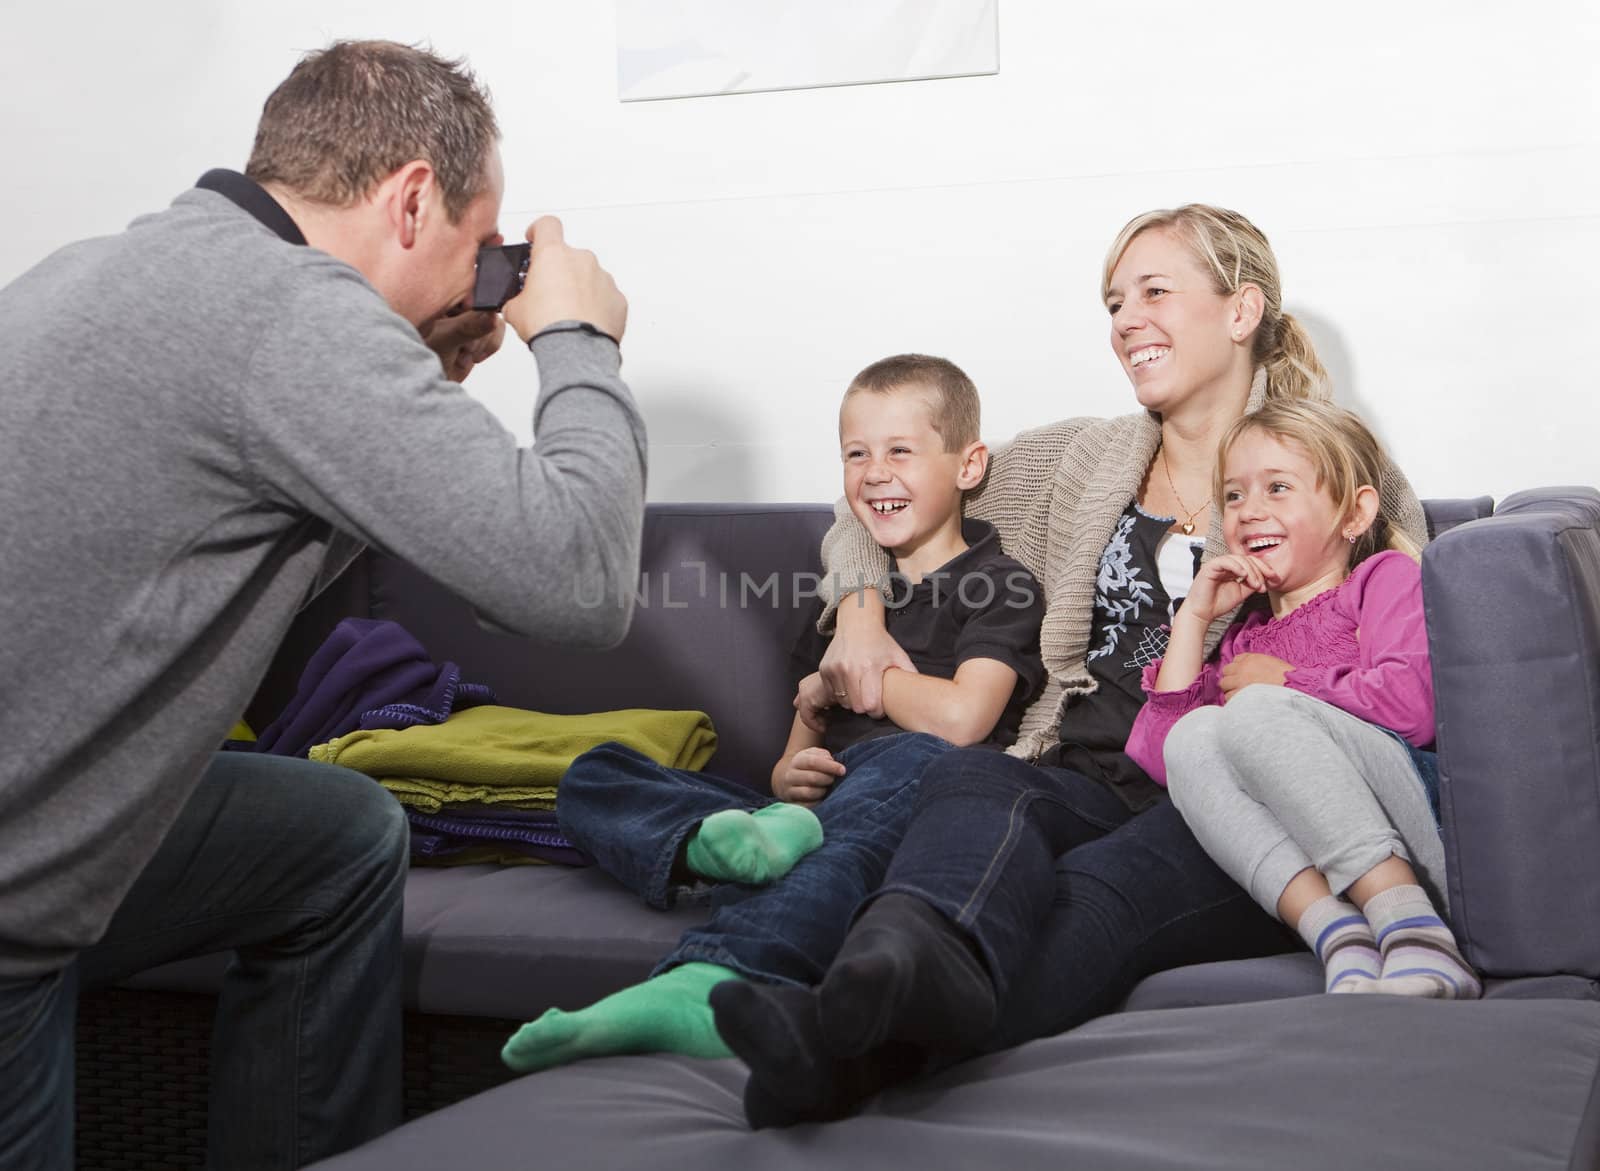 Father taking a photo of his family siting in the sofa